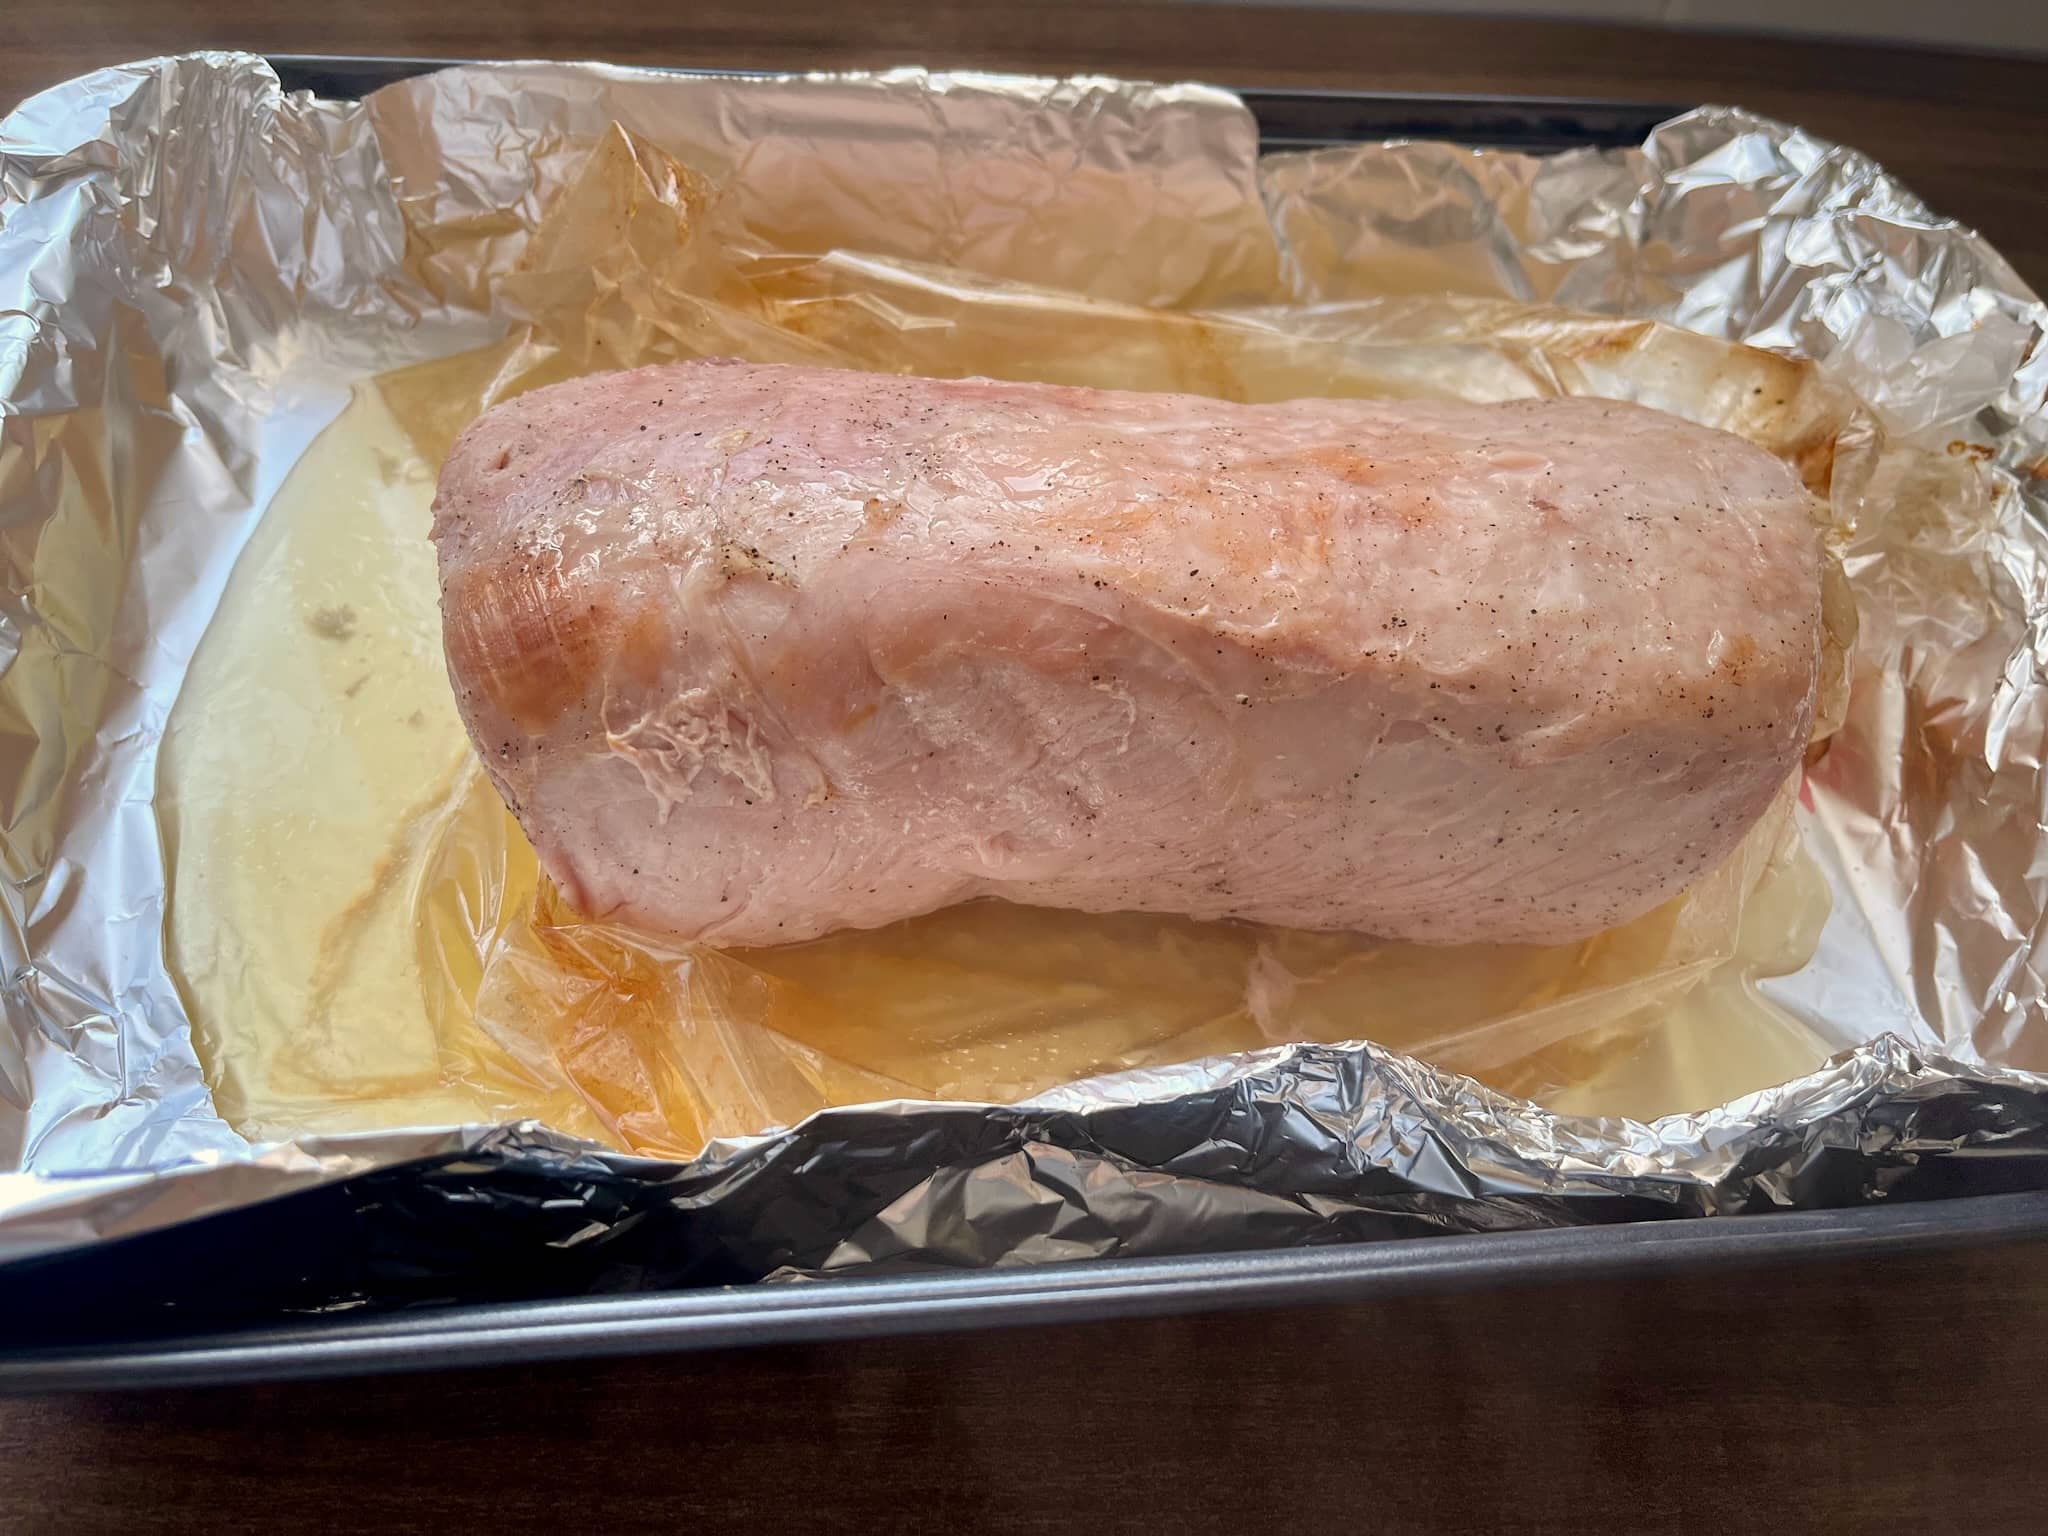 Baked marinated pork loin in an open roasting bag on a tray